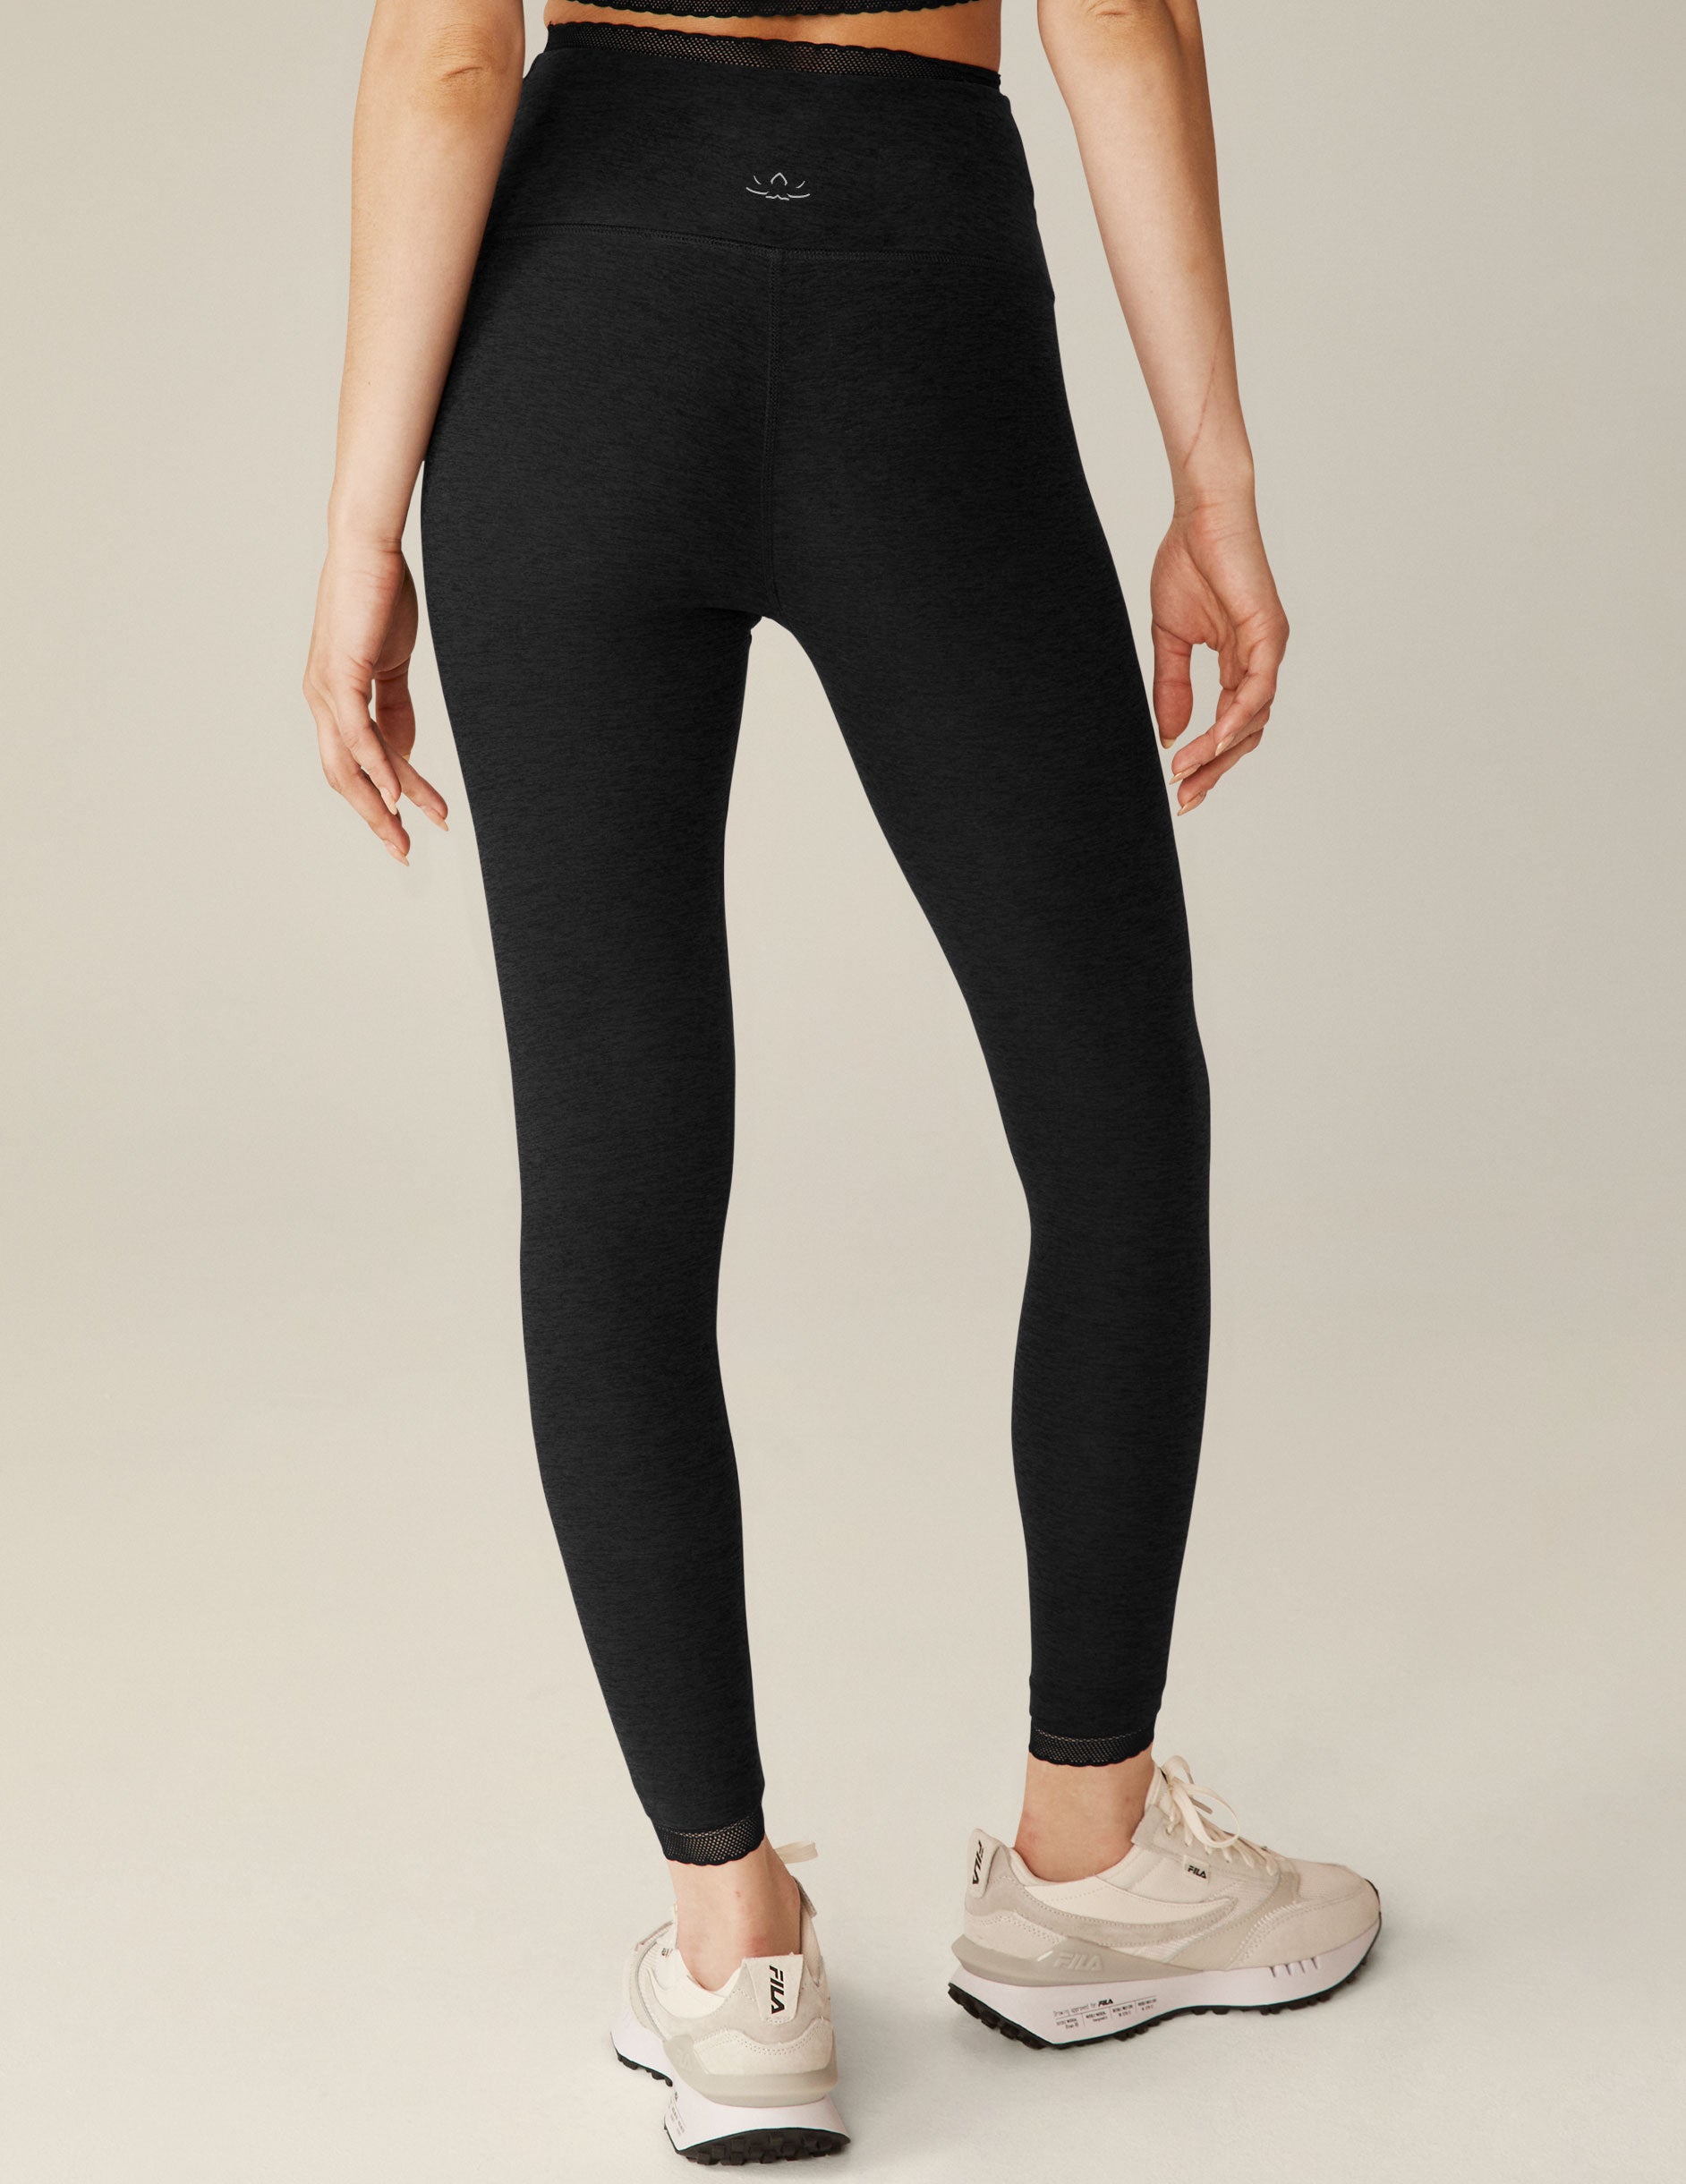 black high-waisted midi leggings with a lace trim at waistband and ankles. 